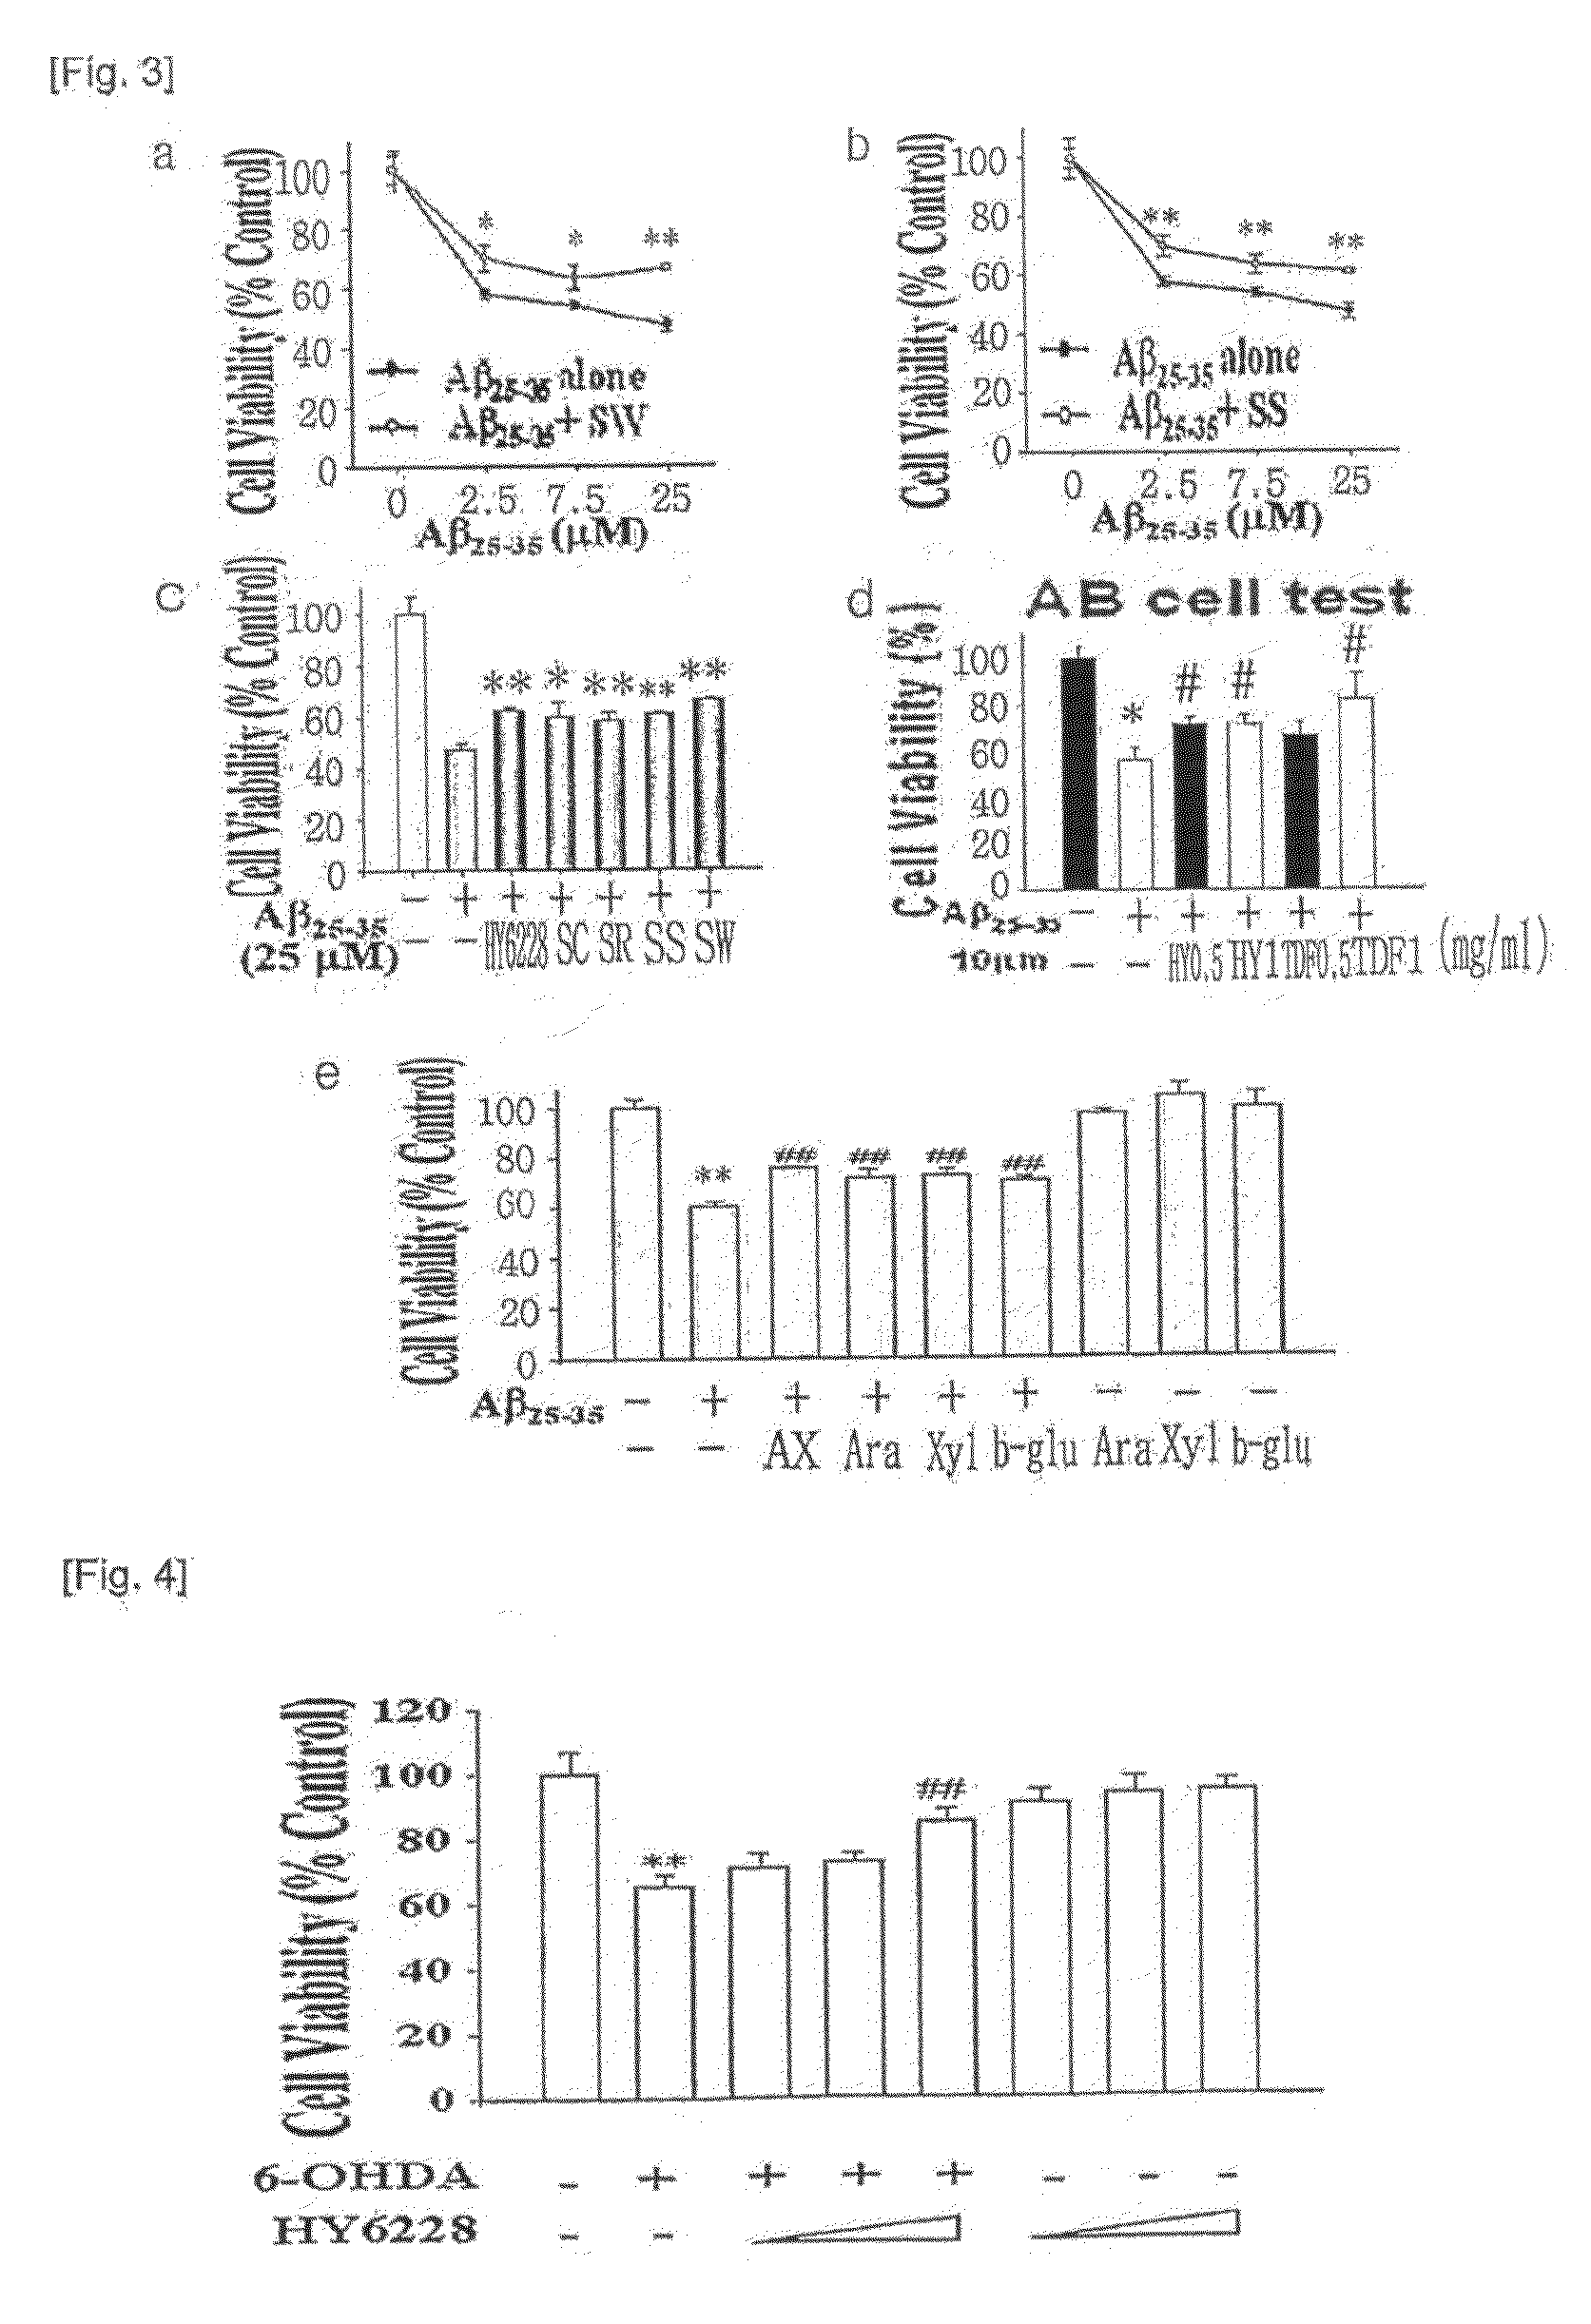 Composition Comprising Starch Or Dietary Fiber From Gramineae Plant For Prevention And Treatment Of Ischemic Diseases And Degenerative Brain Disease